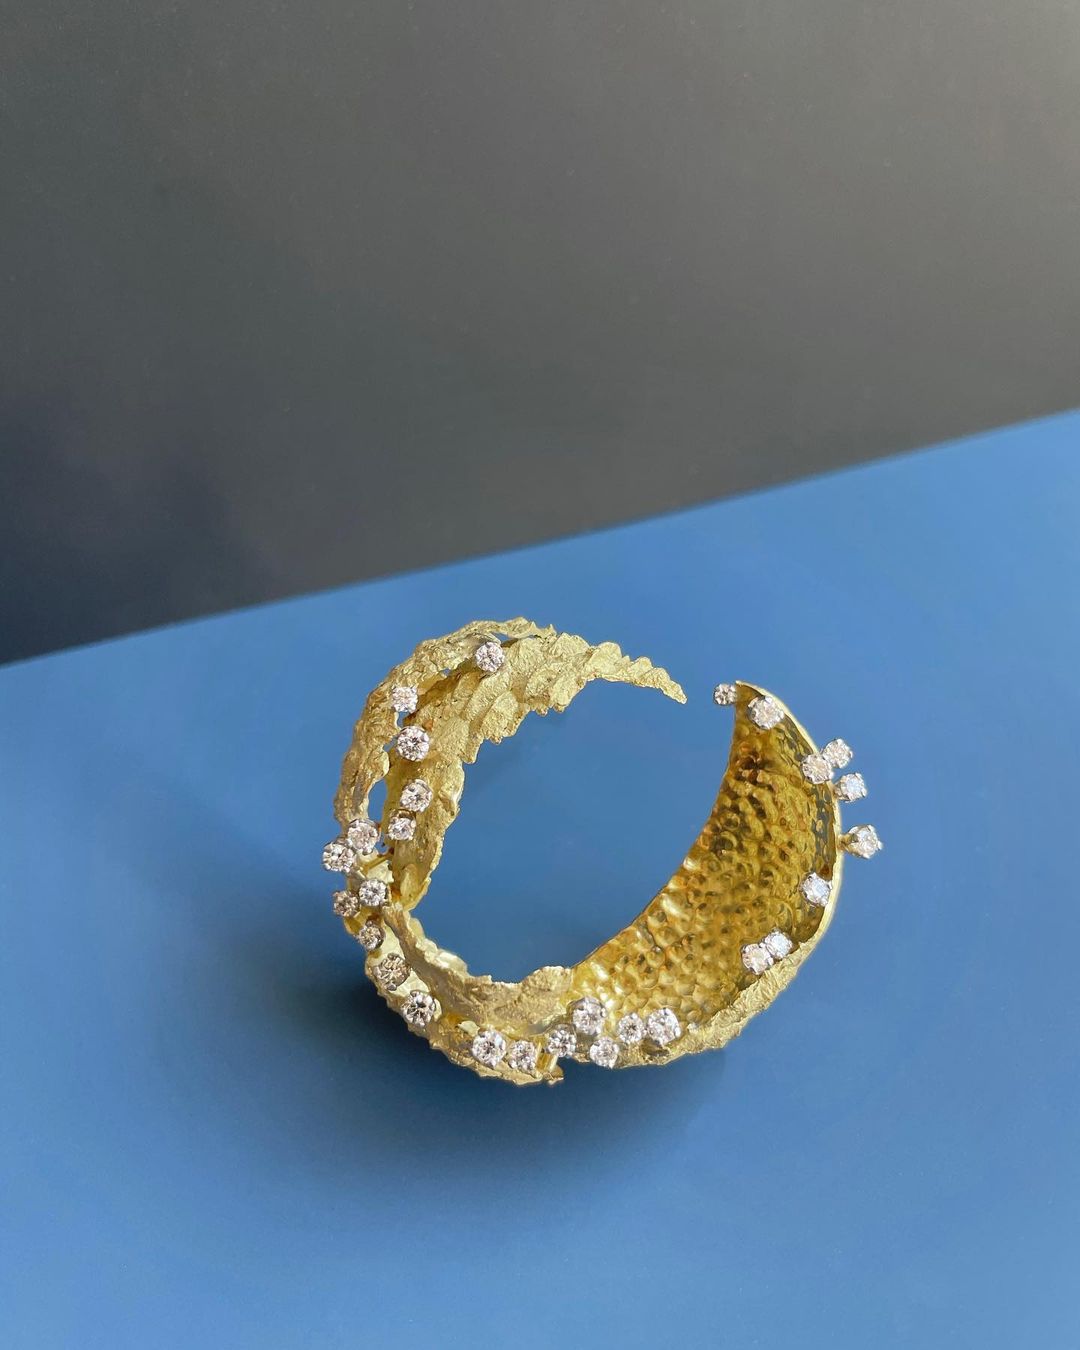 Lychee Brooch by Andrew Grima. Yellow Gold and Diamonds. Image Courtesy of F. Grima